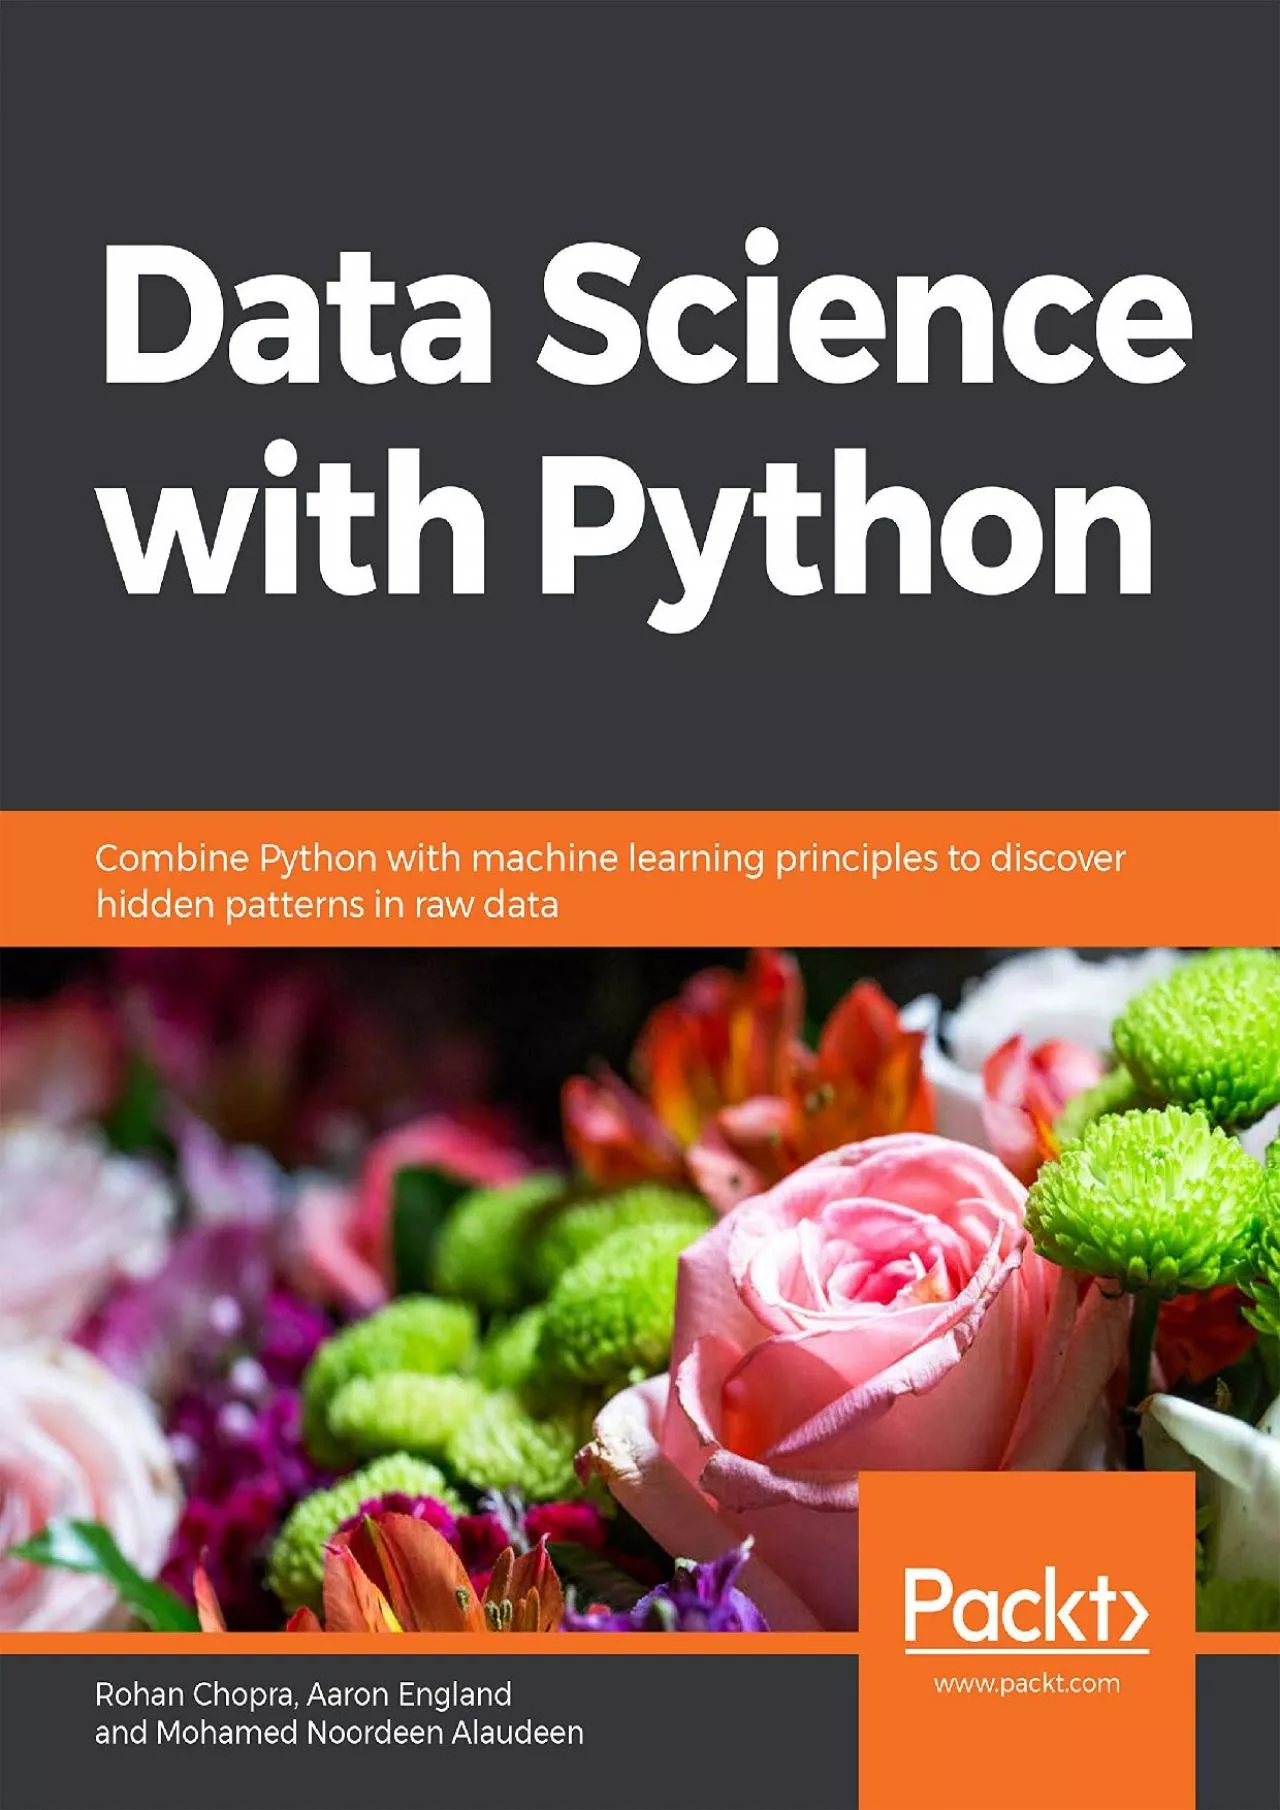 [BEST]-Data Science with Python: Combine Python with machine learning principles to discover